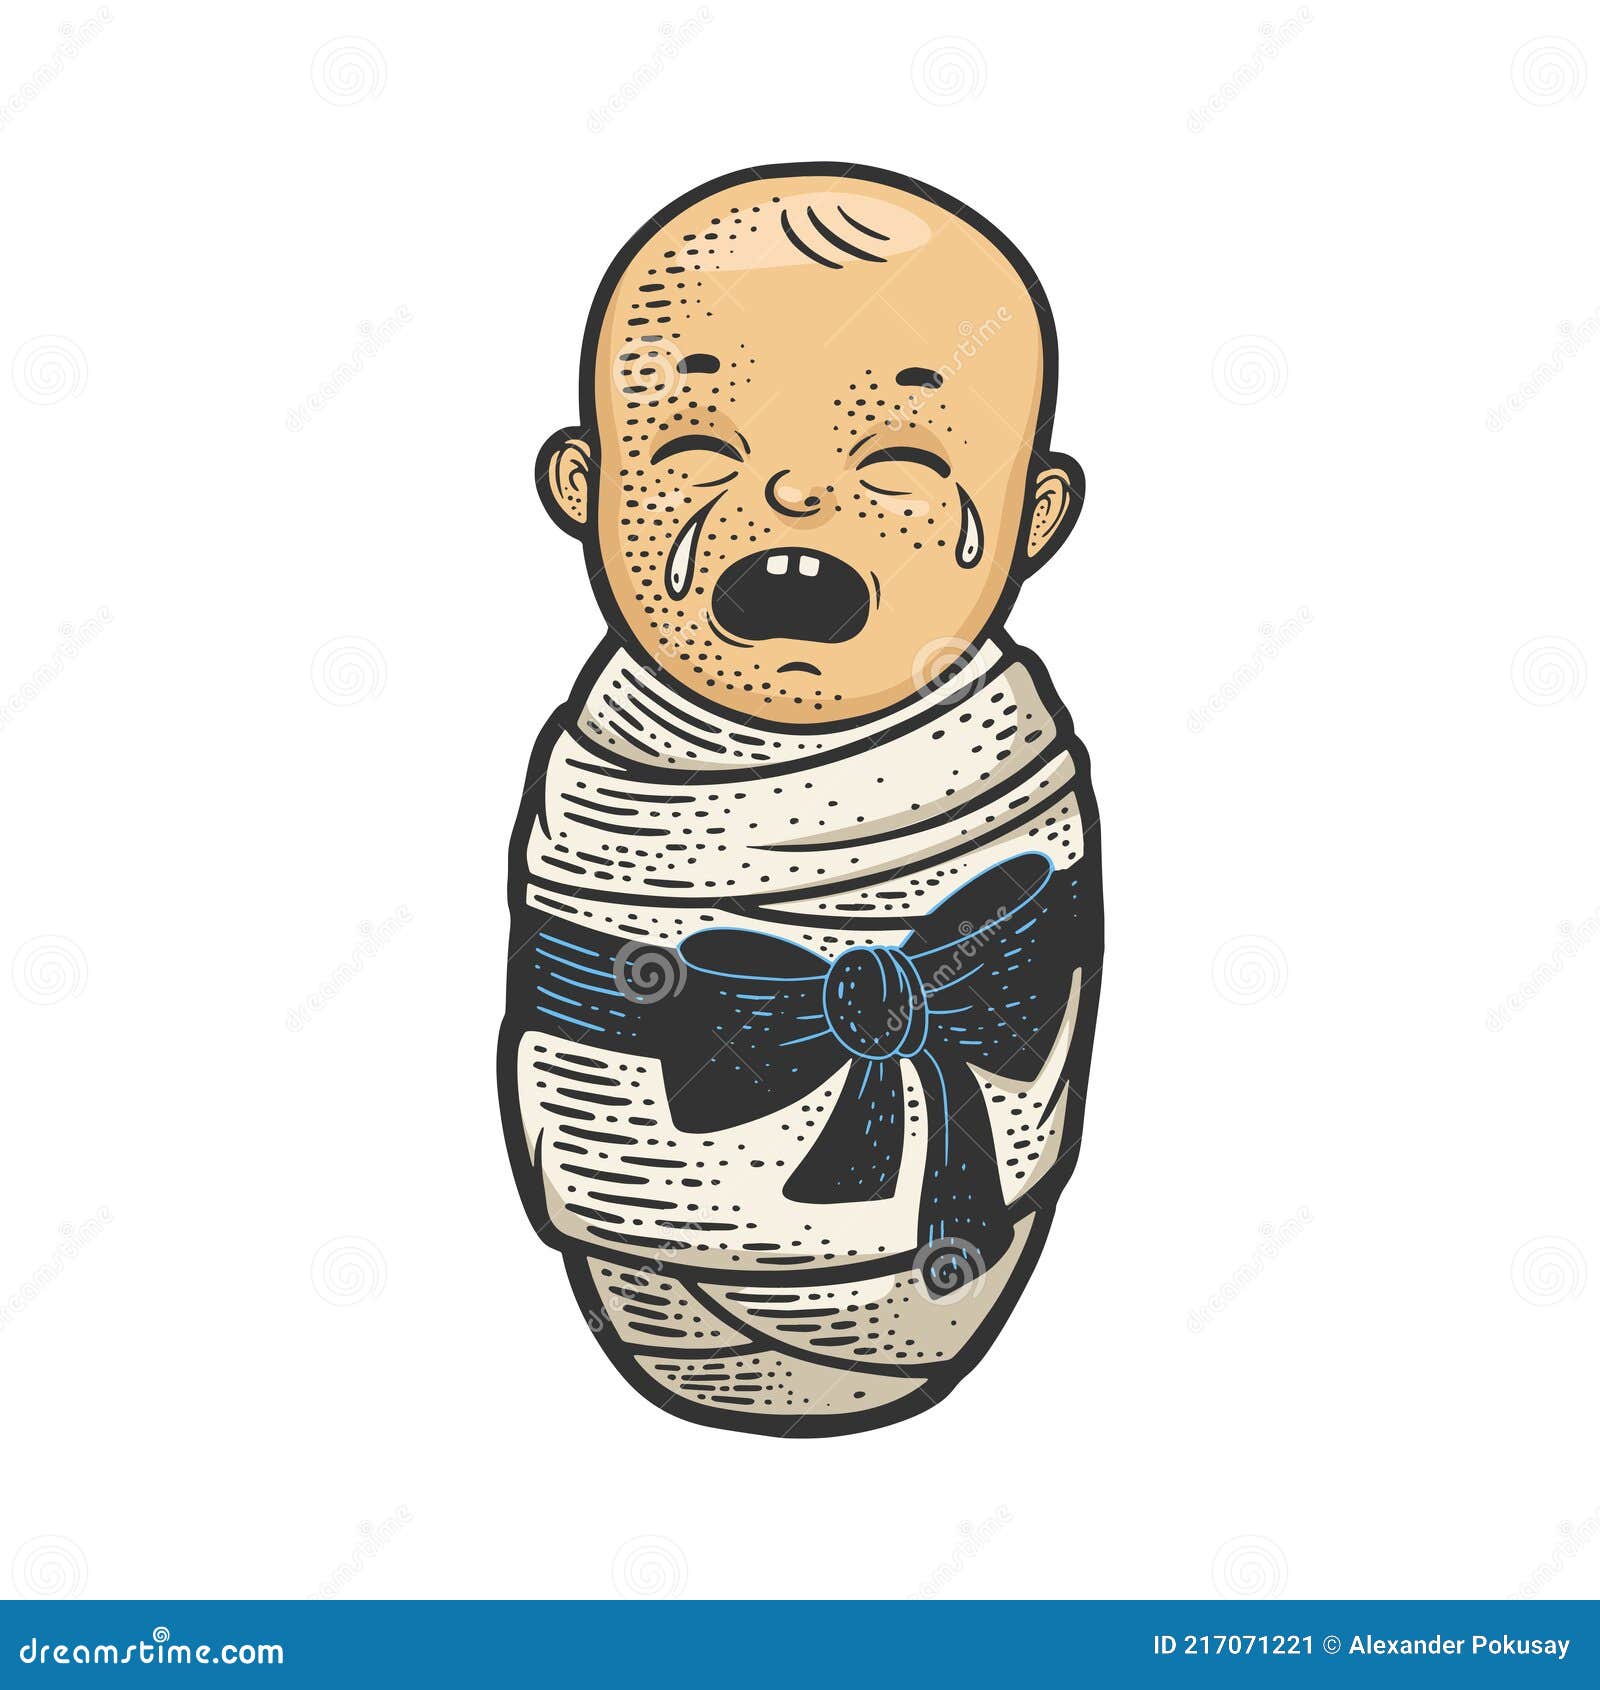 How To Draw A Baby Crying - Drawing Of A Baby Crying PNG Image |  Transparent PNG Free Download on SeekPNG